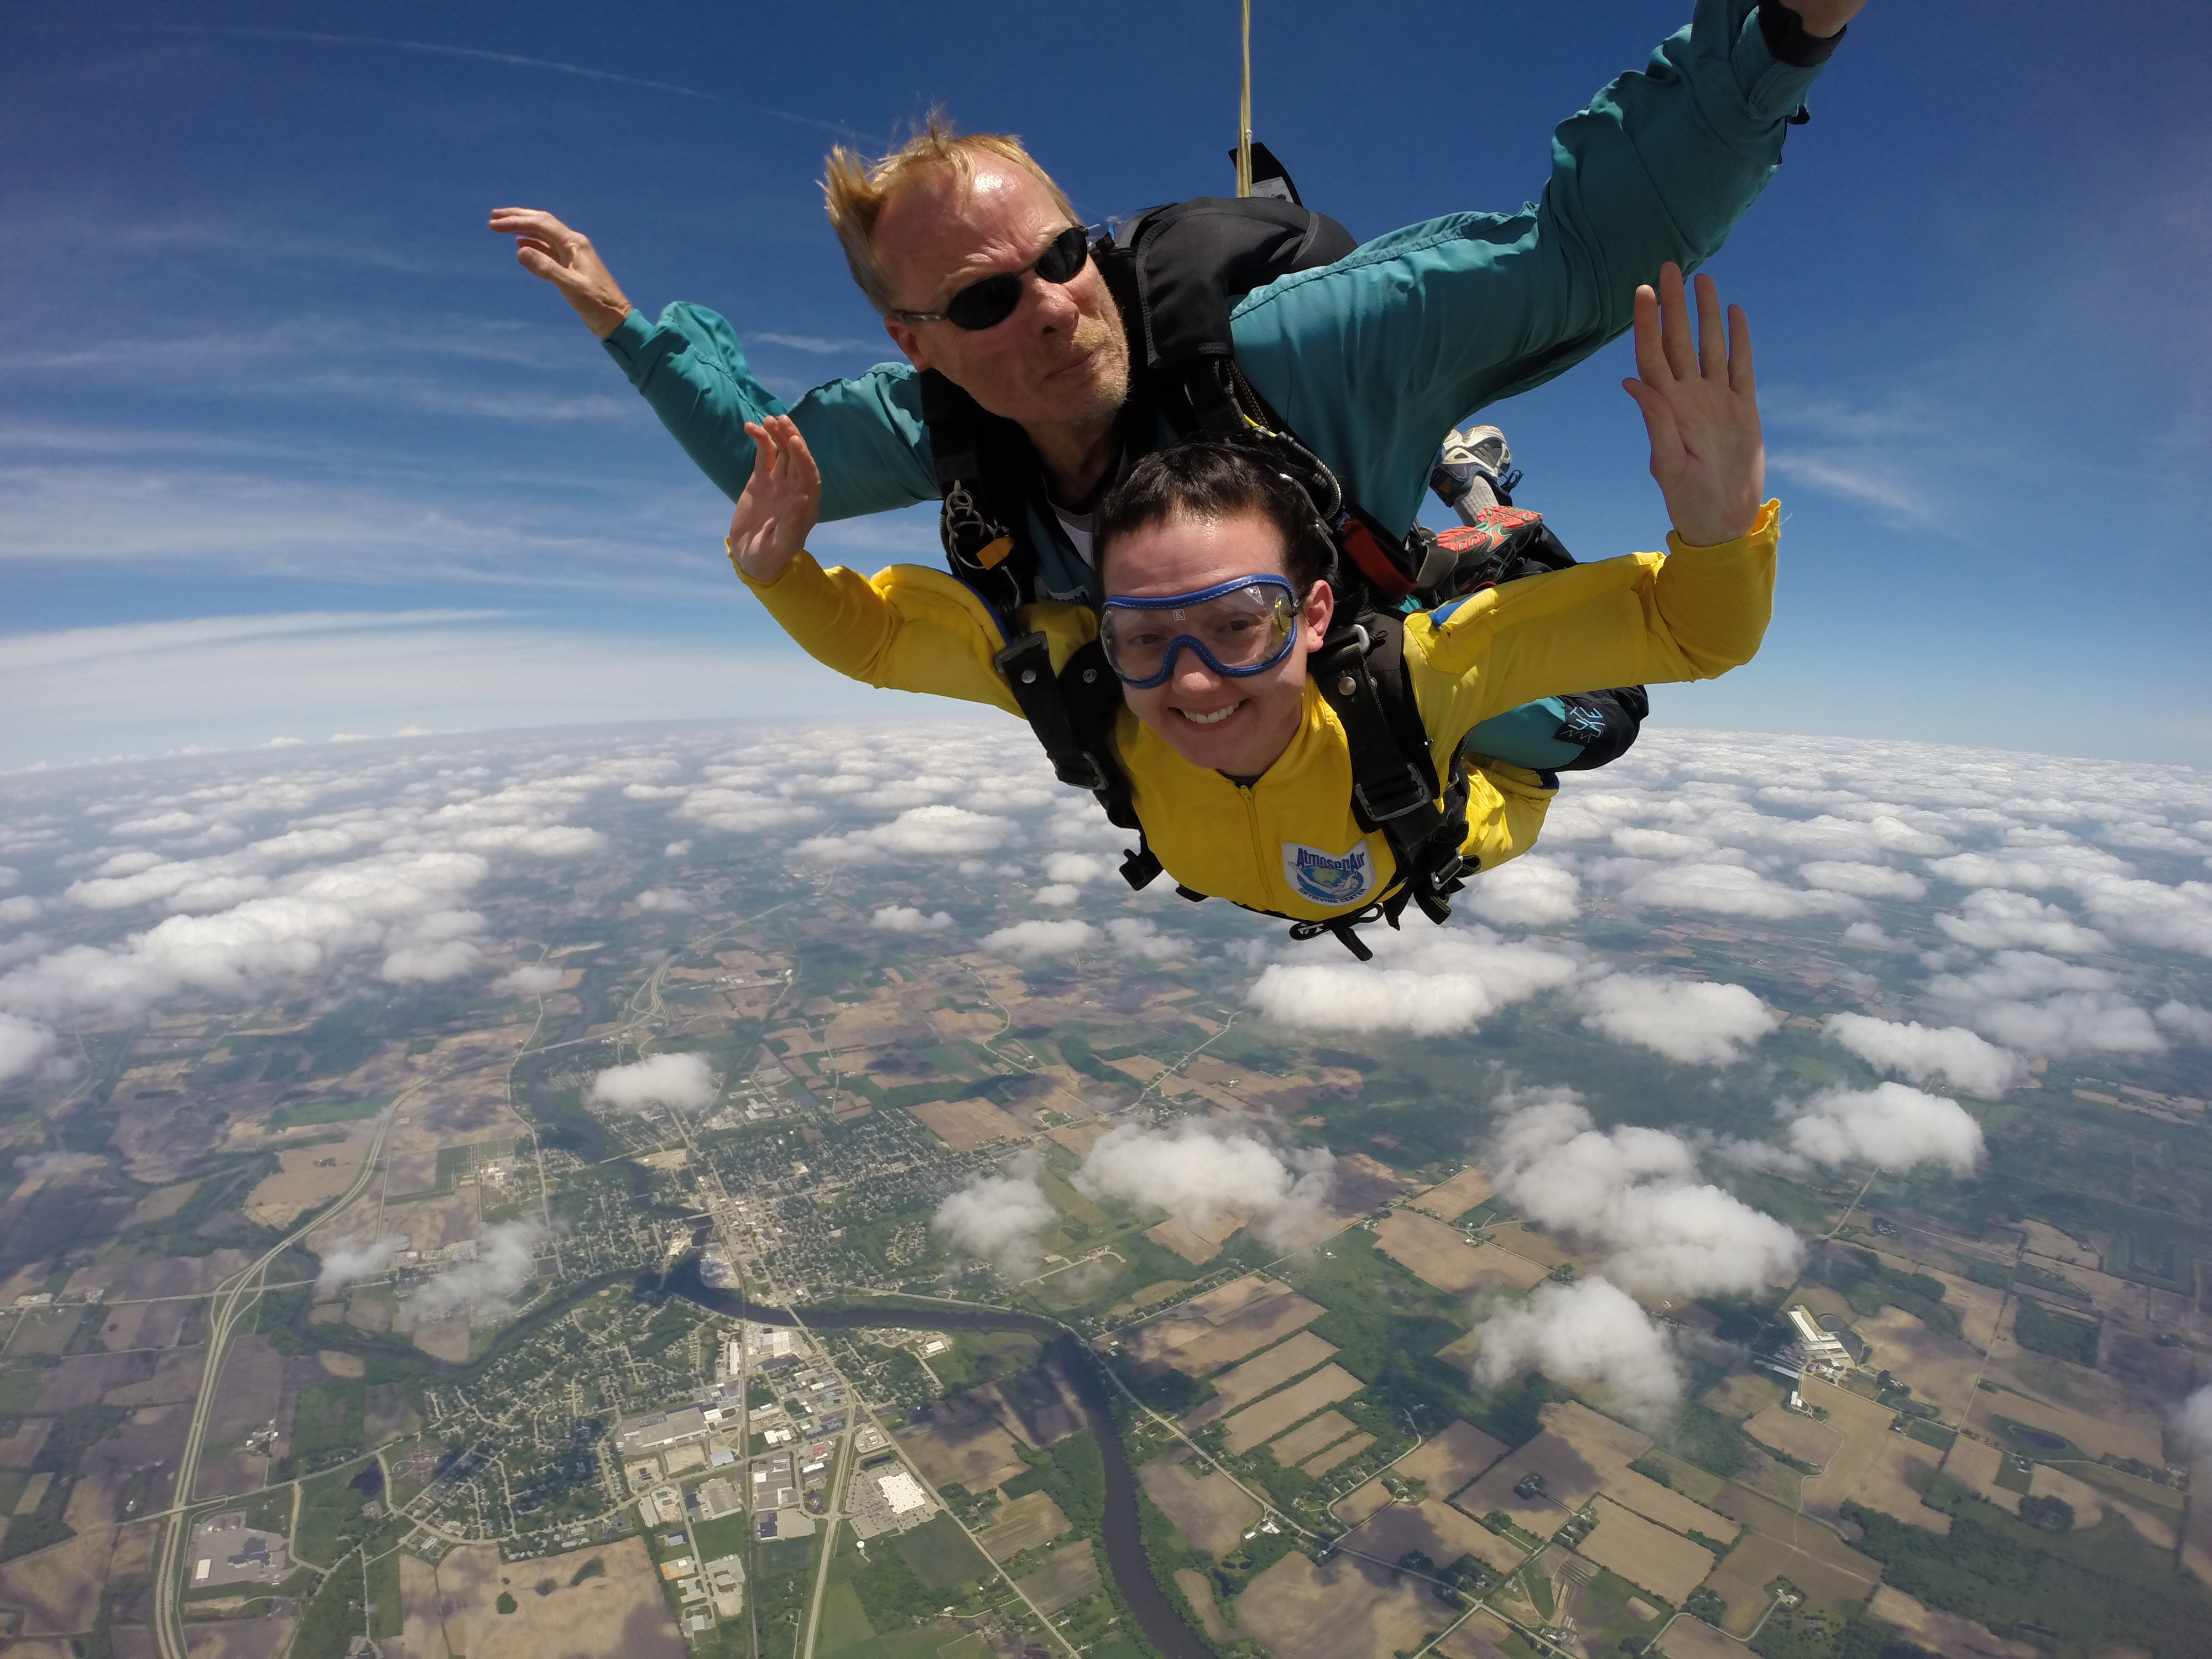 Tandem skydiver in the banana pose with arched back at Wisconsin Skydiving Center near Milwaukee